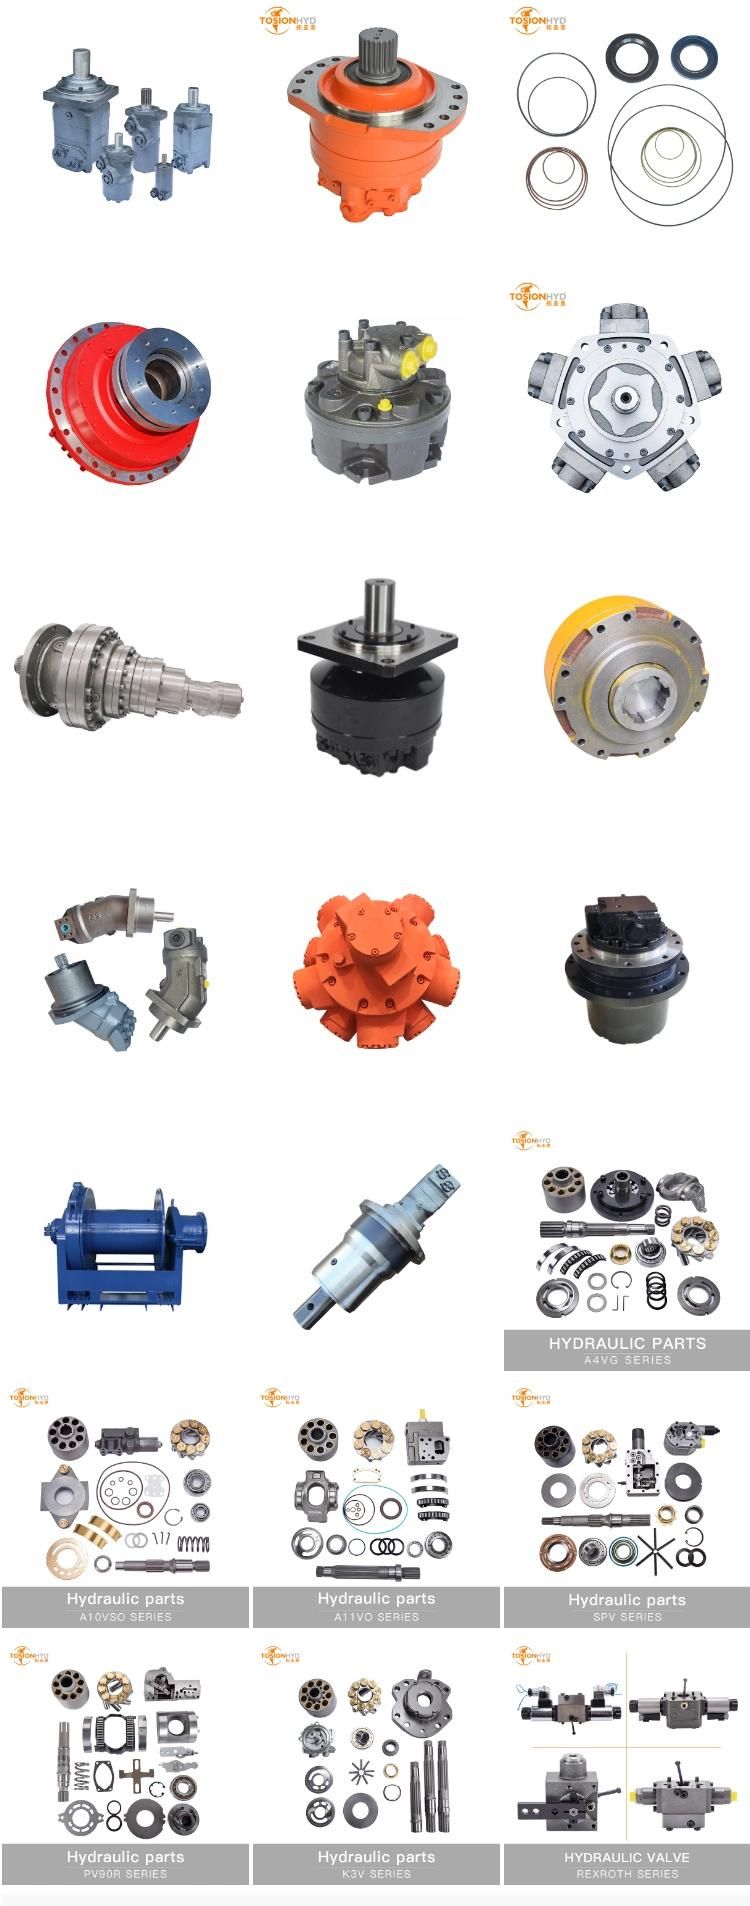 A2FM180 A2FM200 Hydraulic Motor Parts with Rexroth Spare Repair Kits